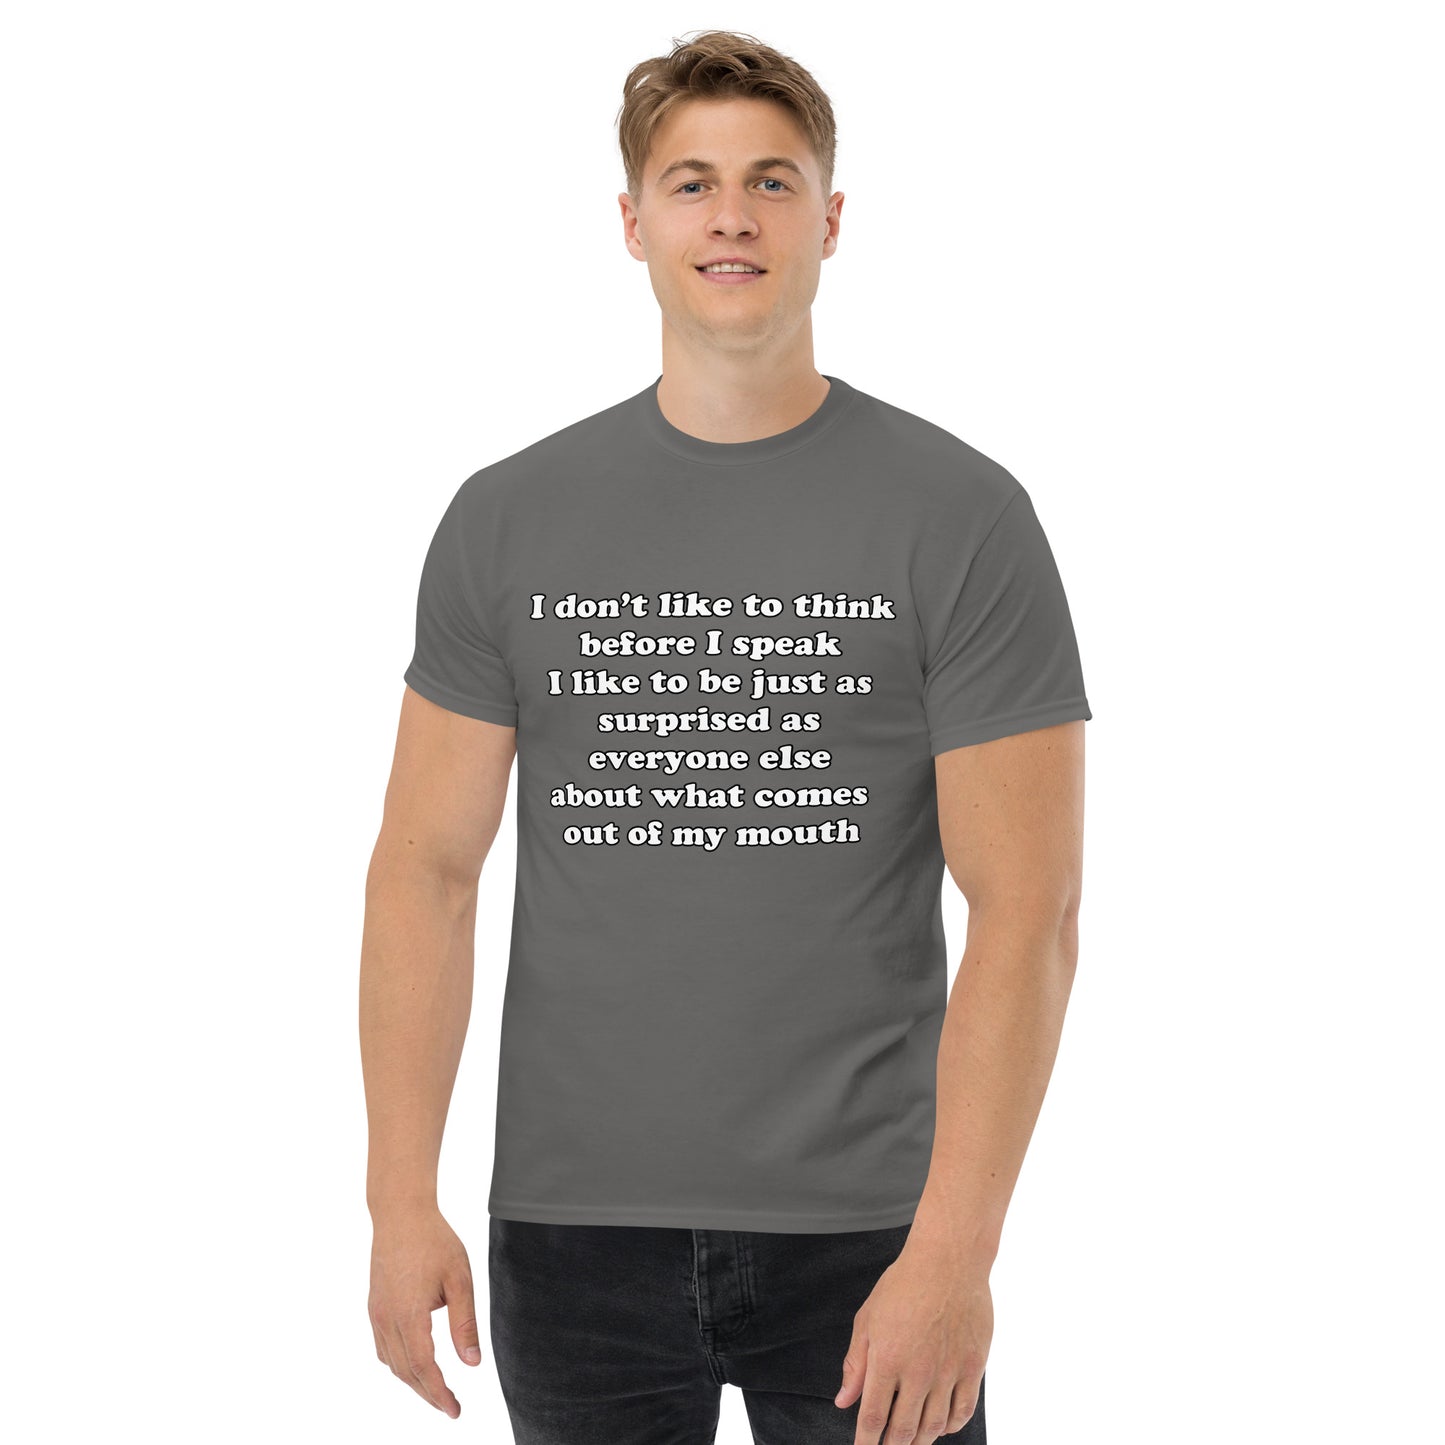 Man with charcoal grey t-shirt with text “I don't think before I speak Just as serprised as everyone about what comes out of my mouth"